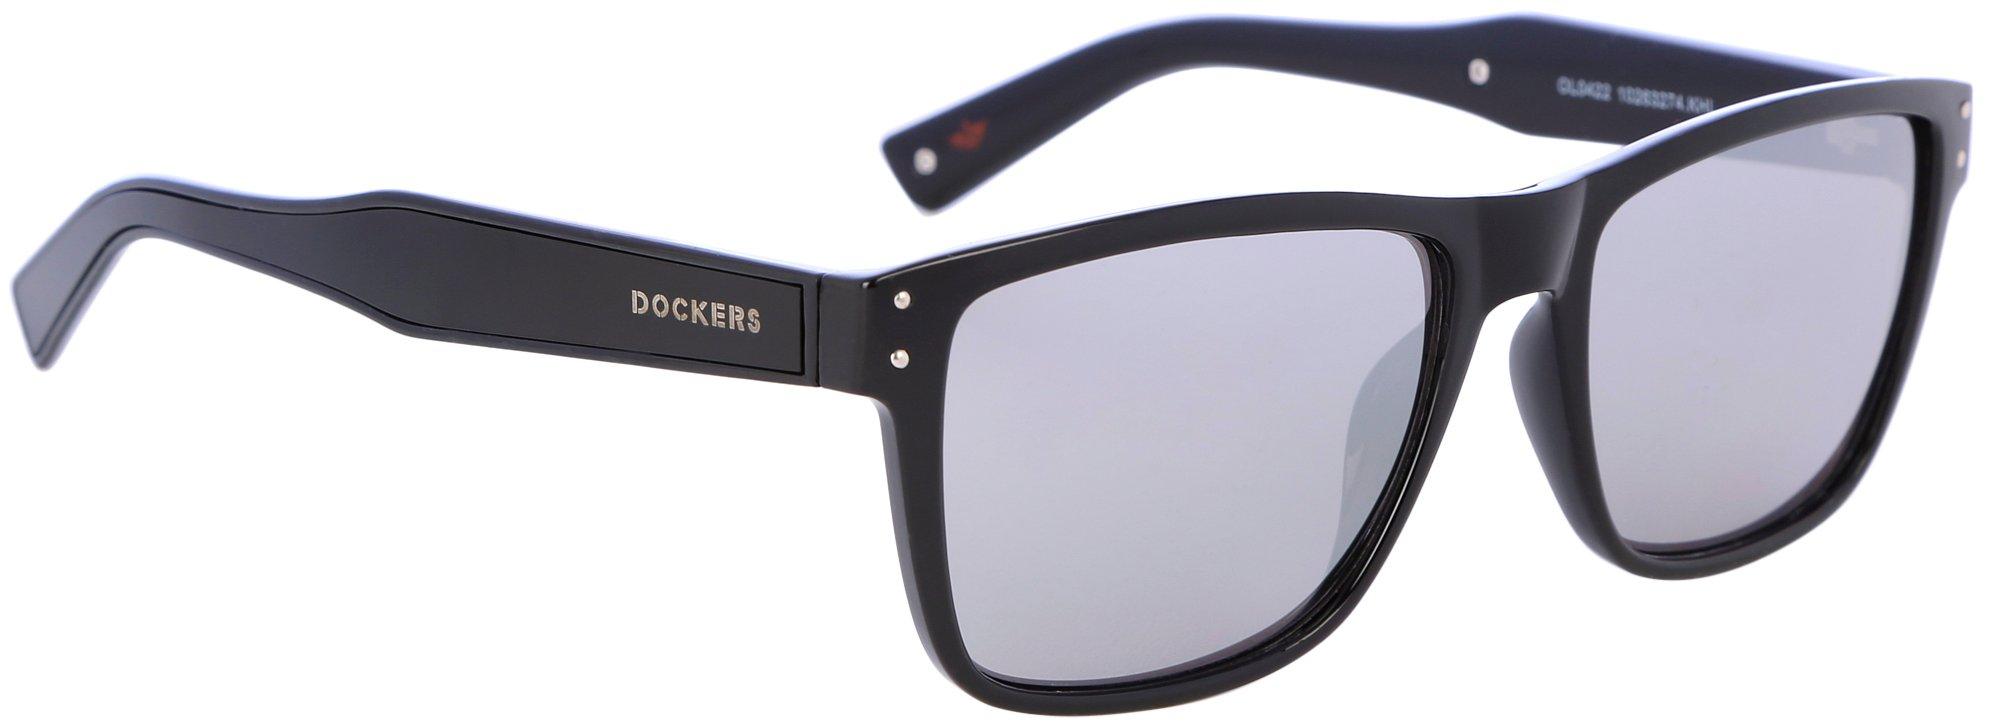 Dockers Mens Solid Mirror Tinted Sunglasses